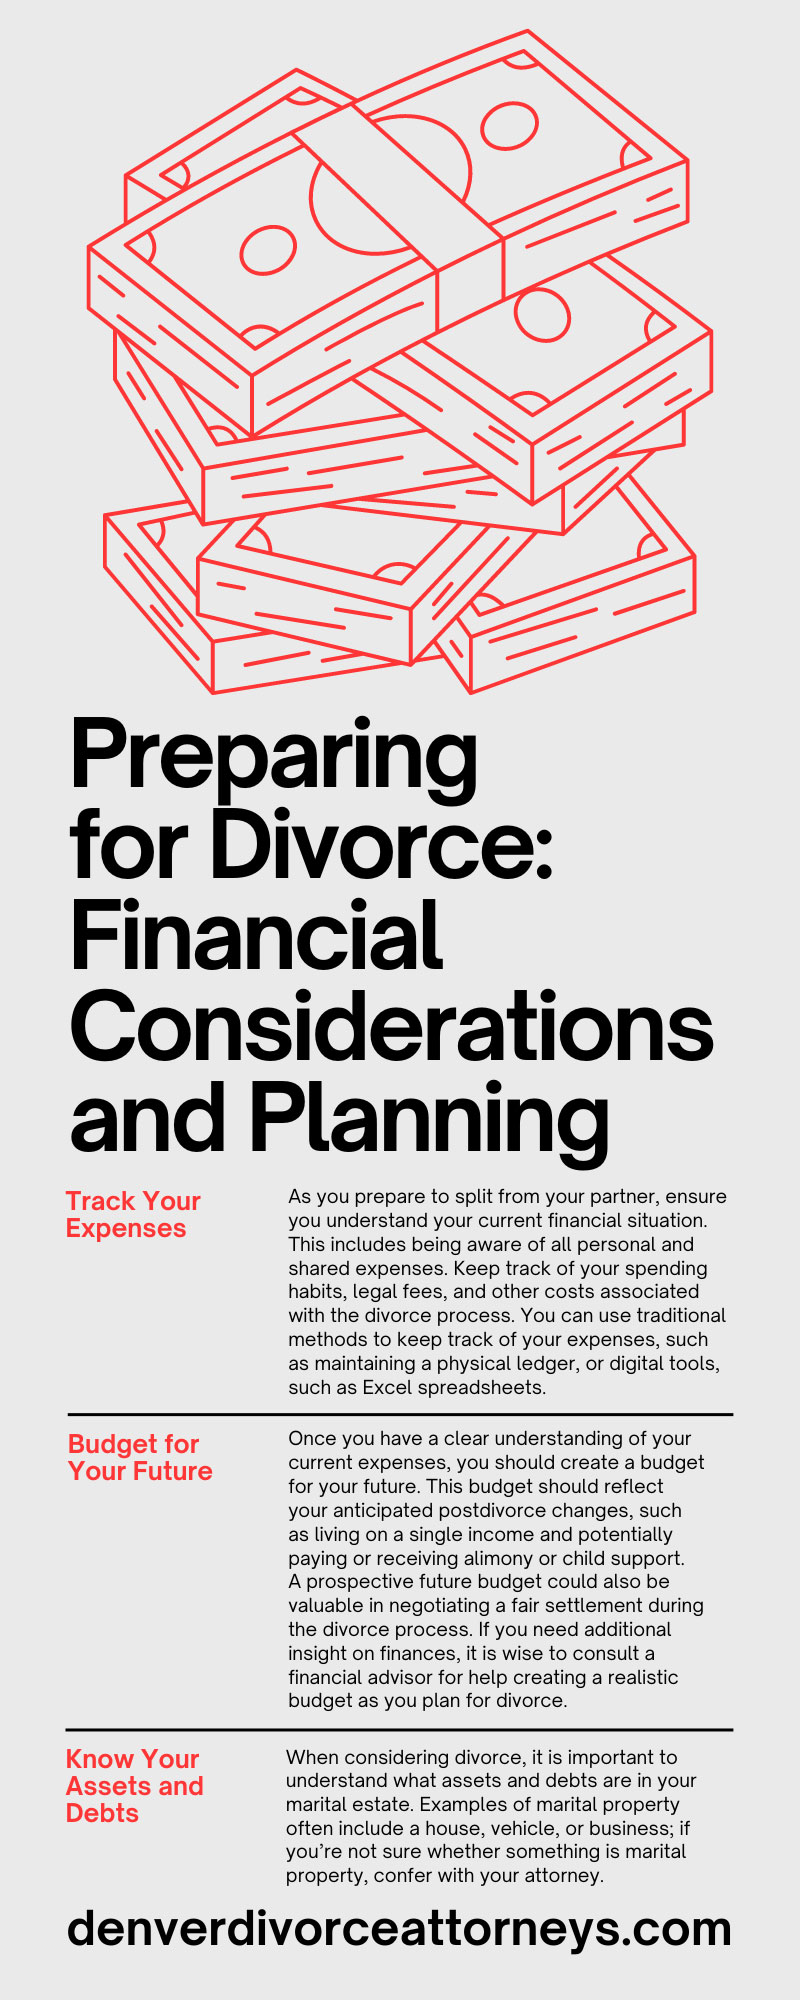 Preparing for Divorce: Financial Considerations and Planning
